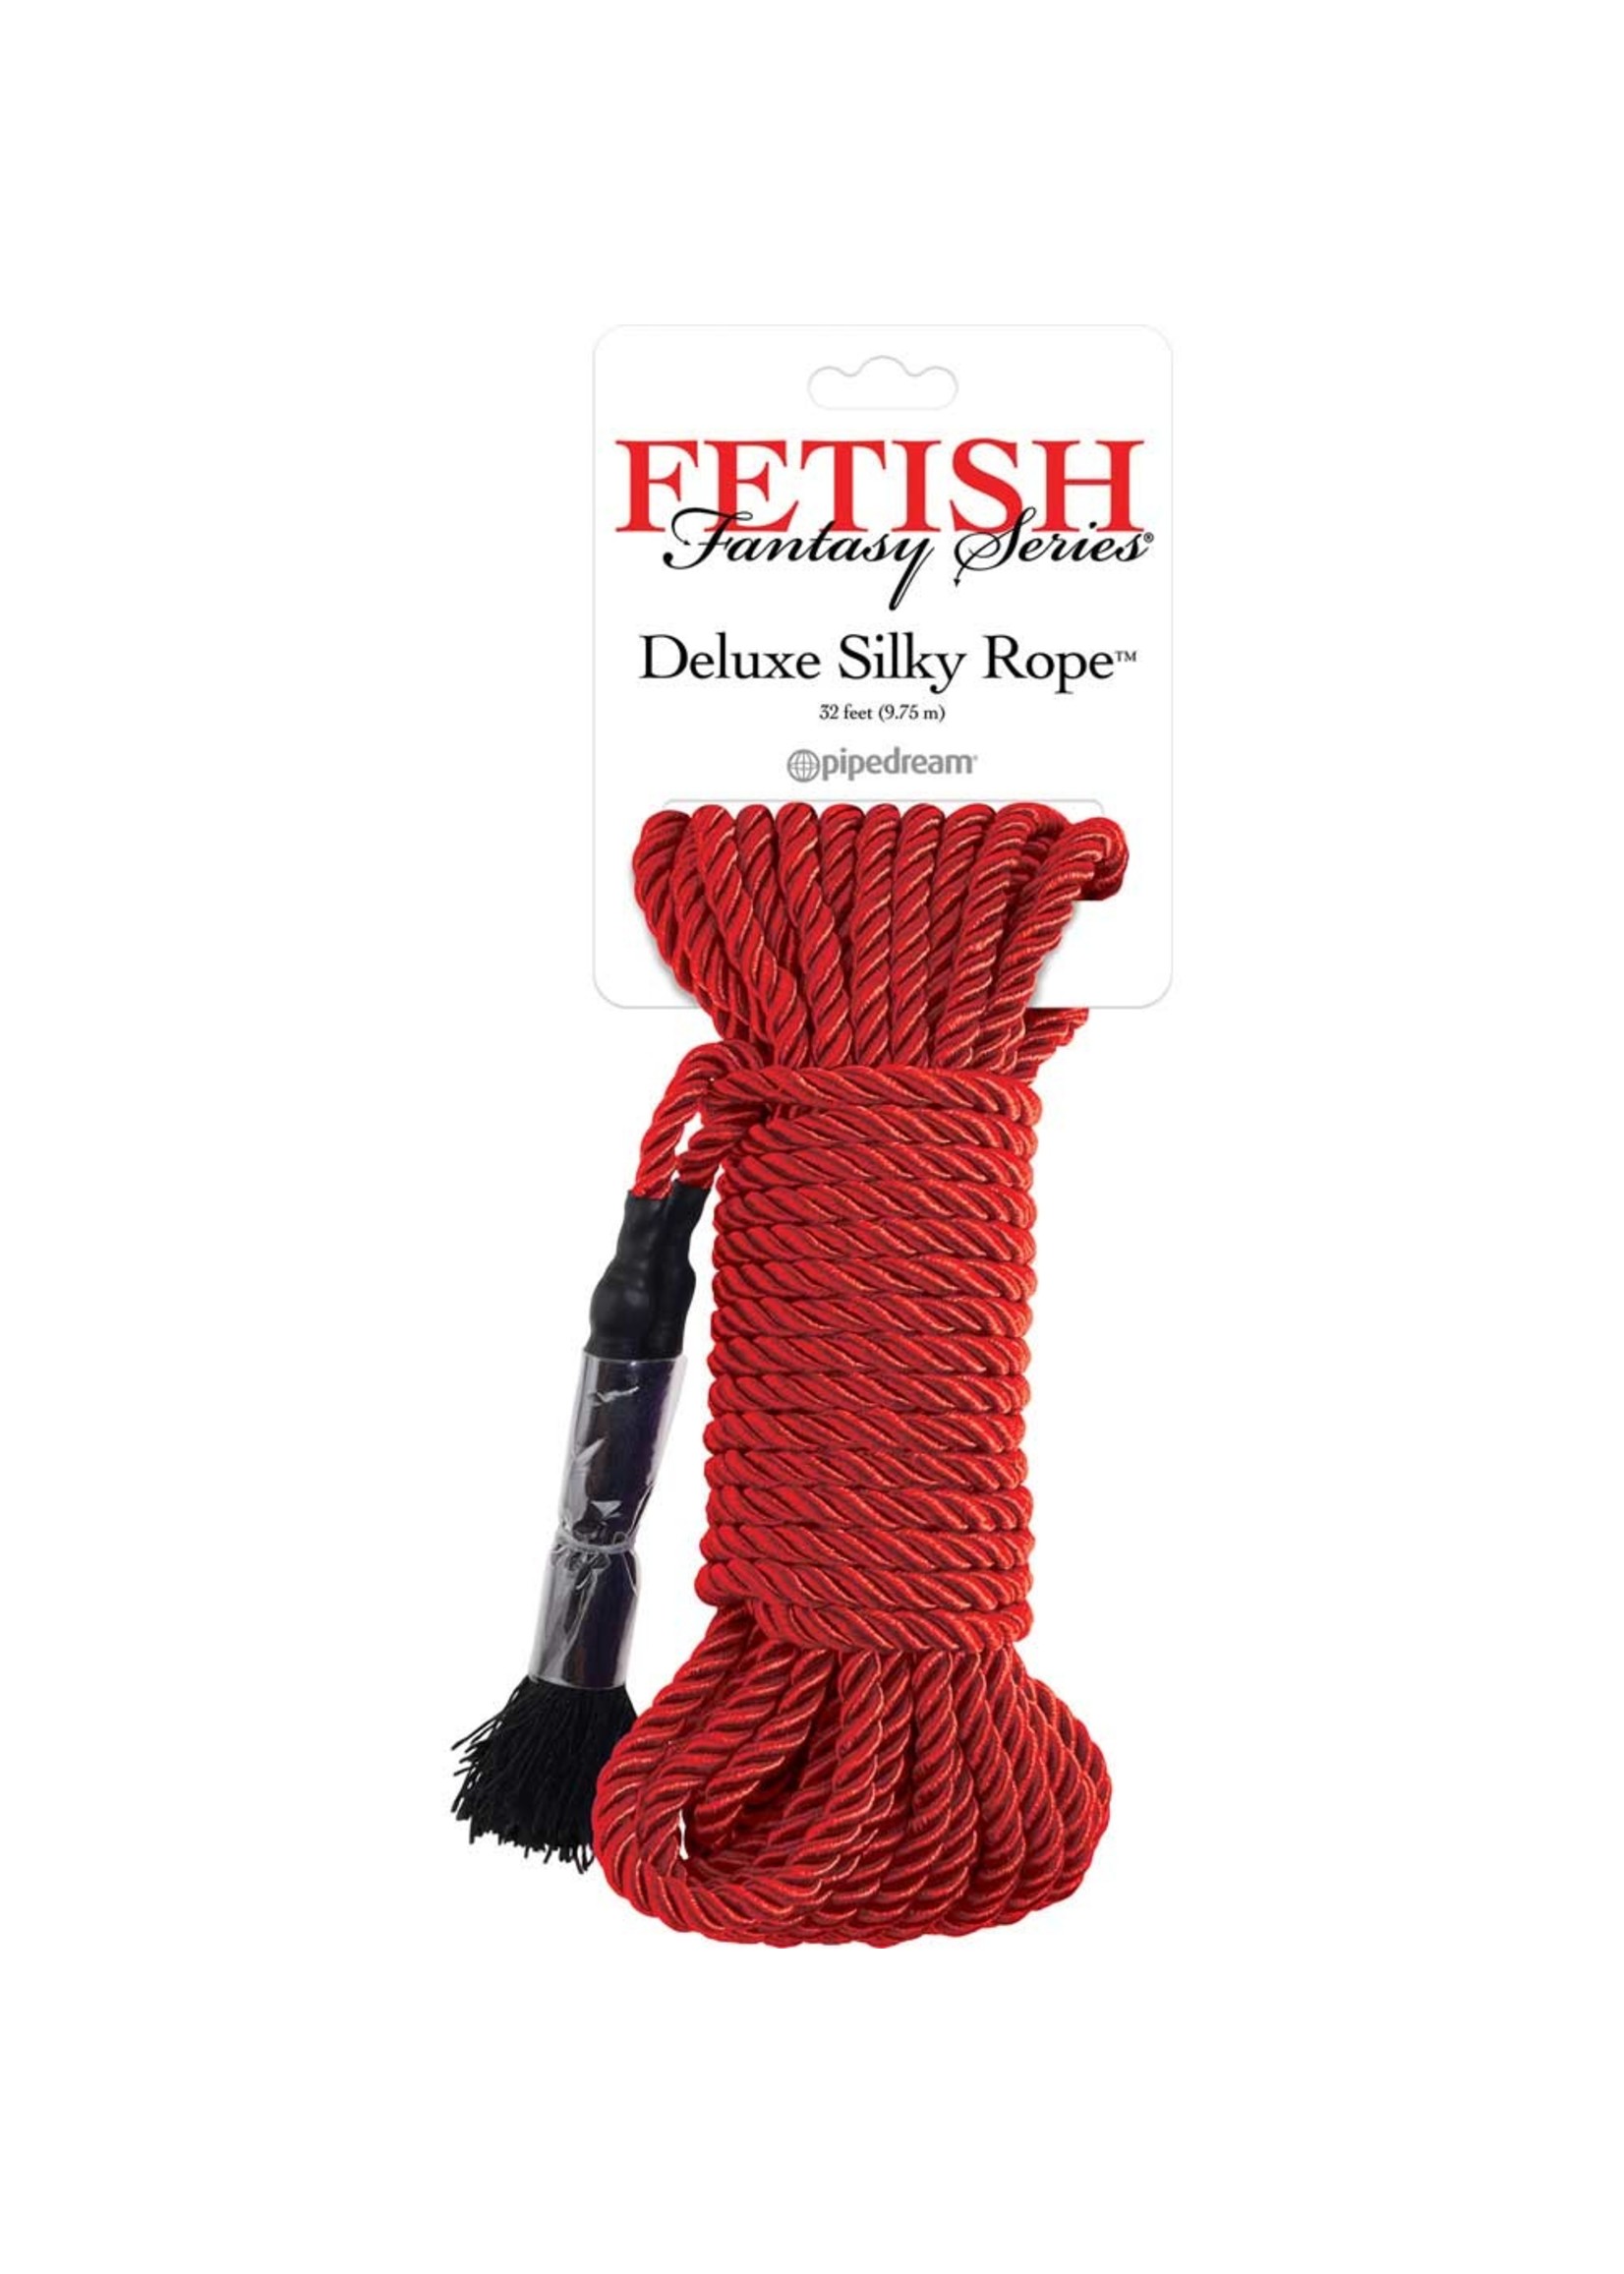 Fetish Fantasy Series Deluxe Silk Rope in Red - 32ft